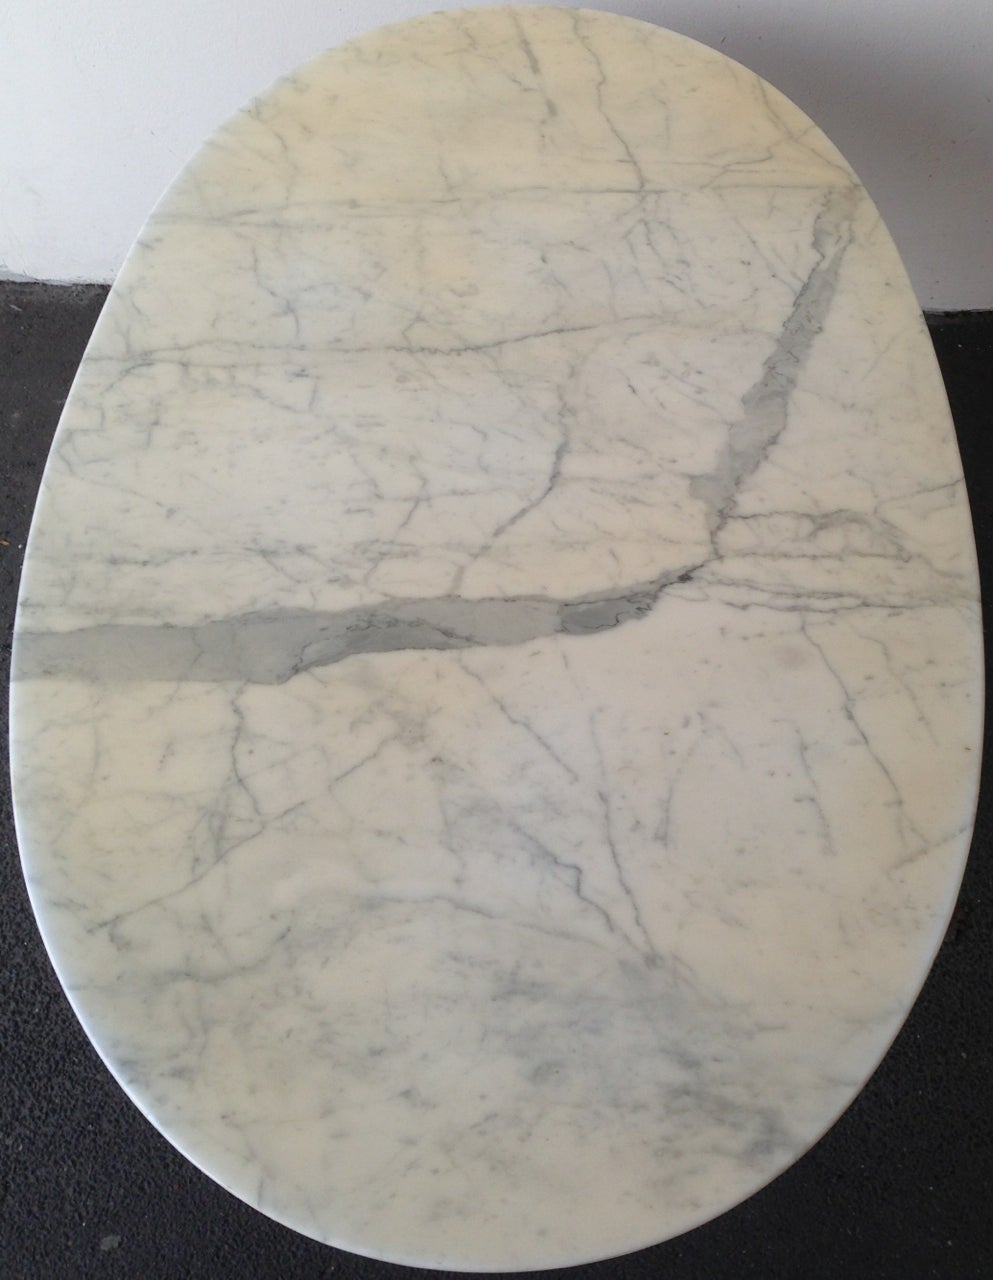 cast metal base and oval marble base. amazing design.